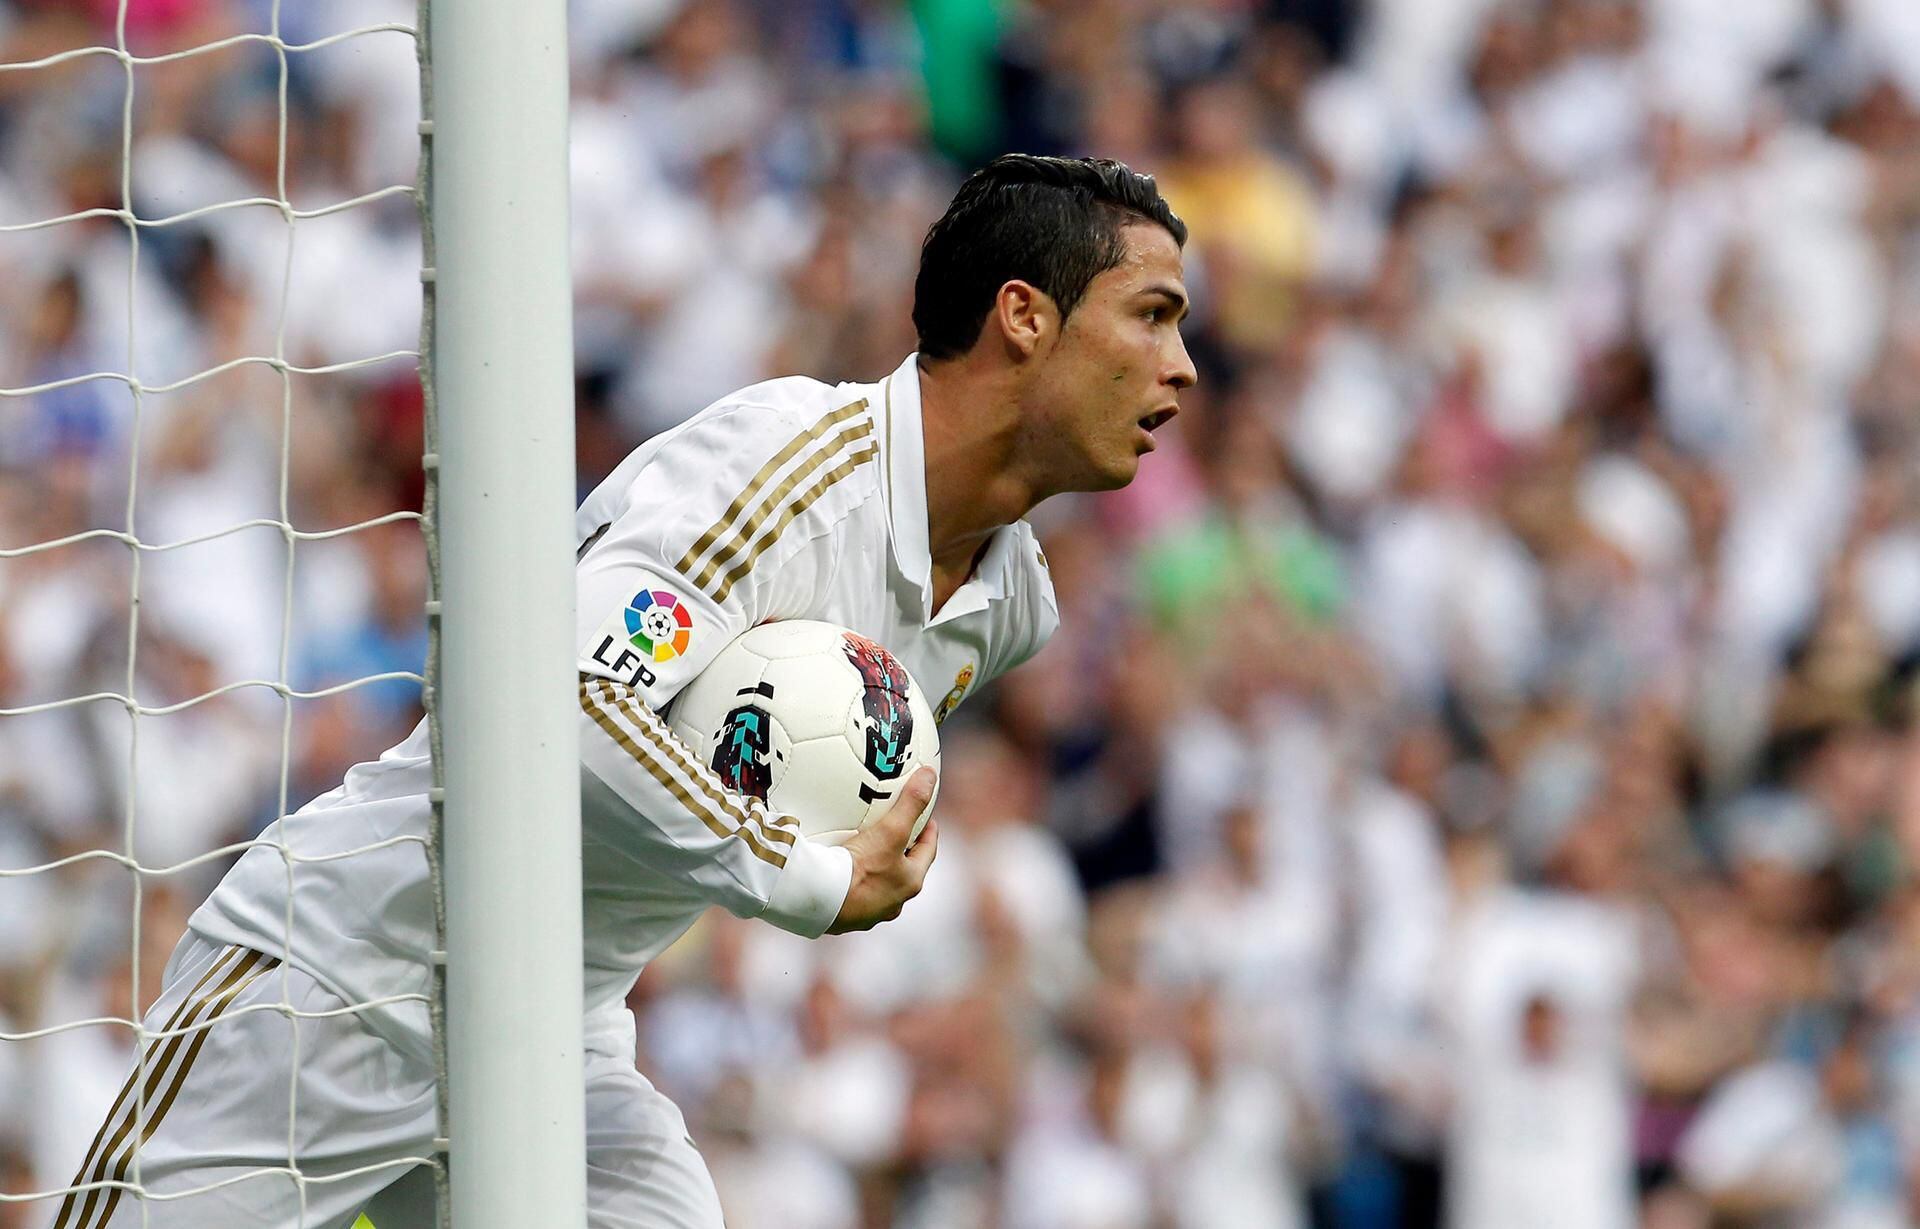 10 interesting facts about Cristiano Ronaldo as the football star